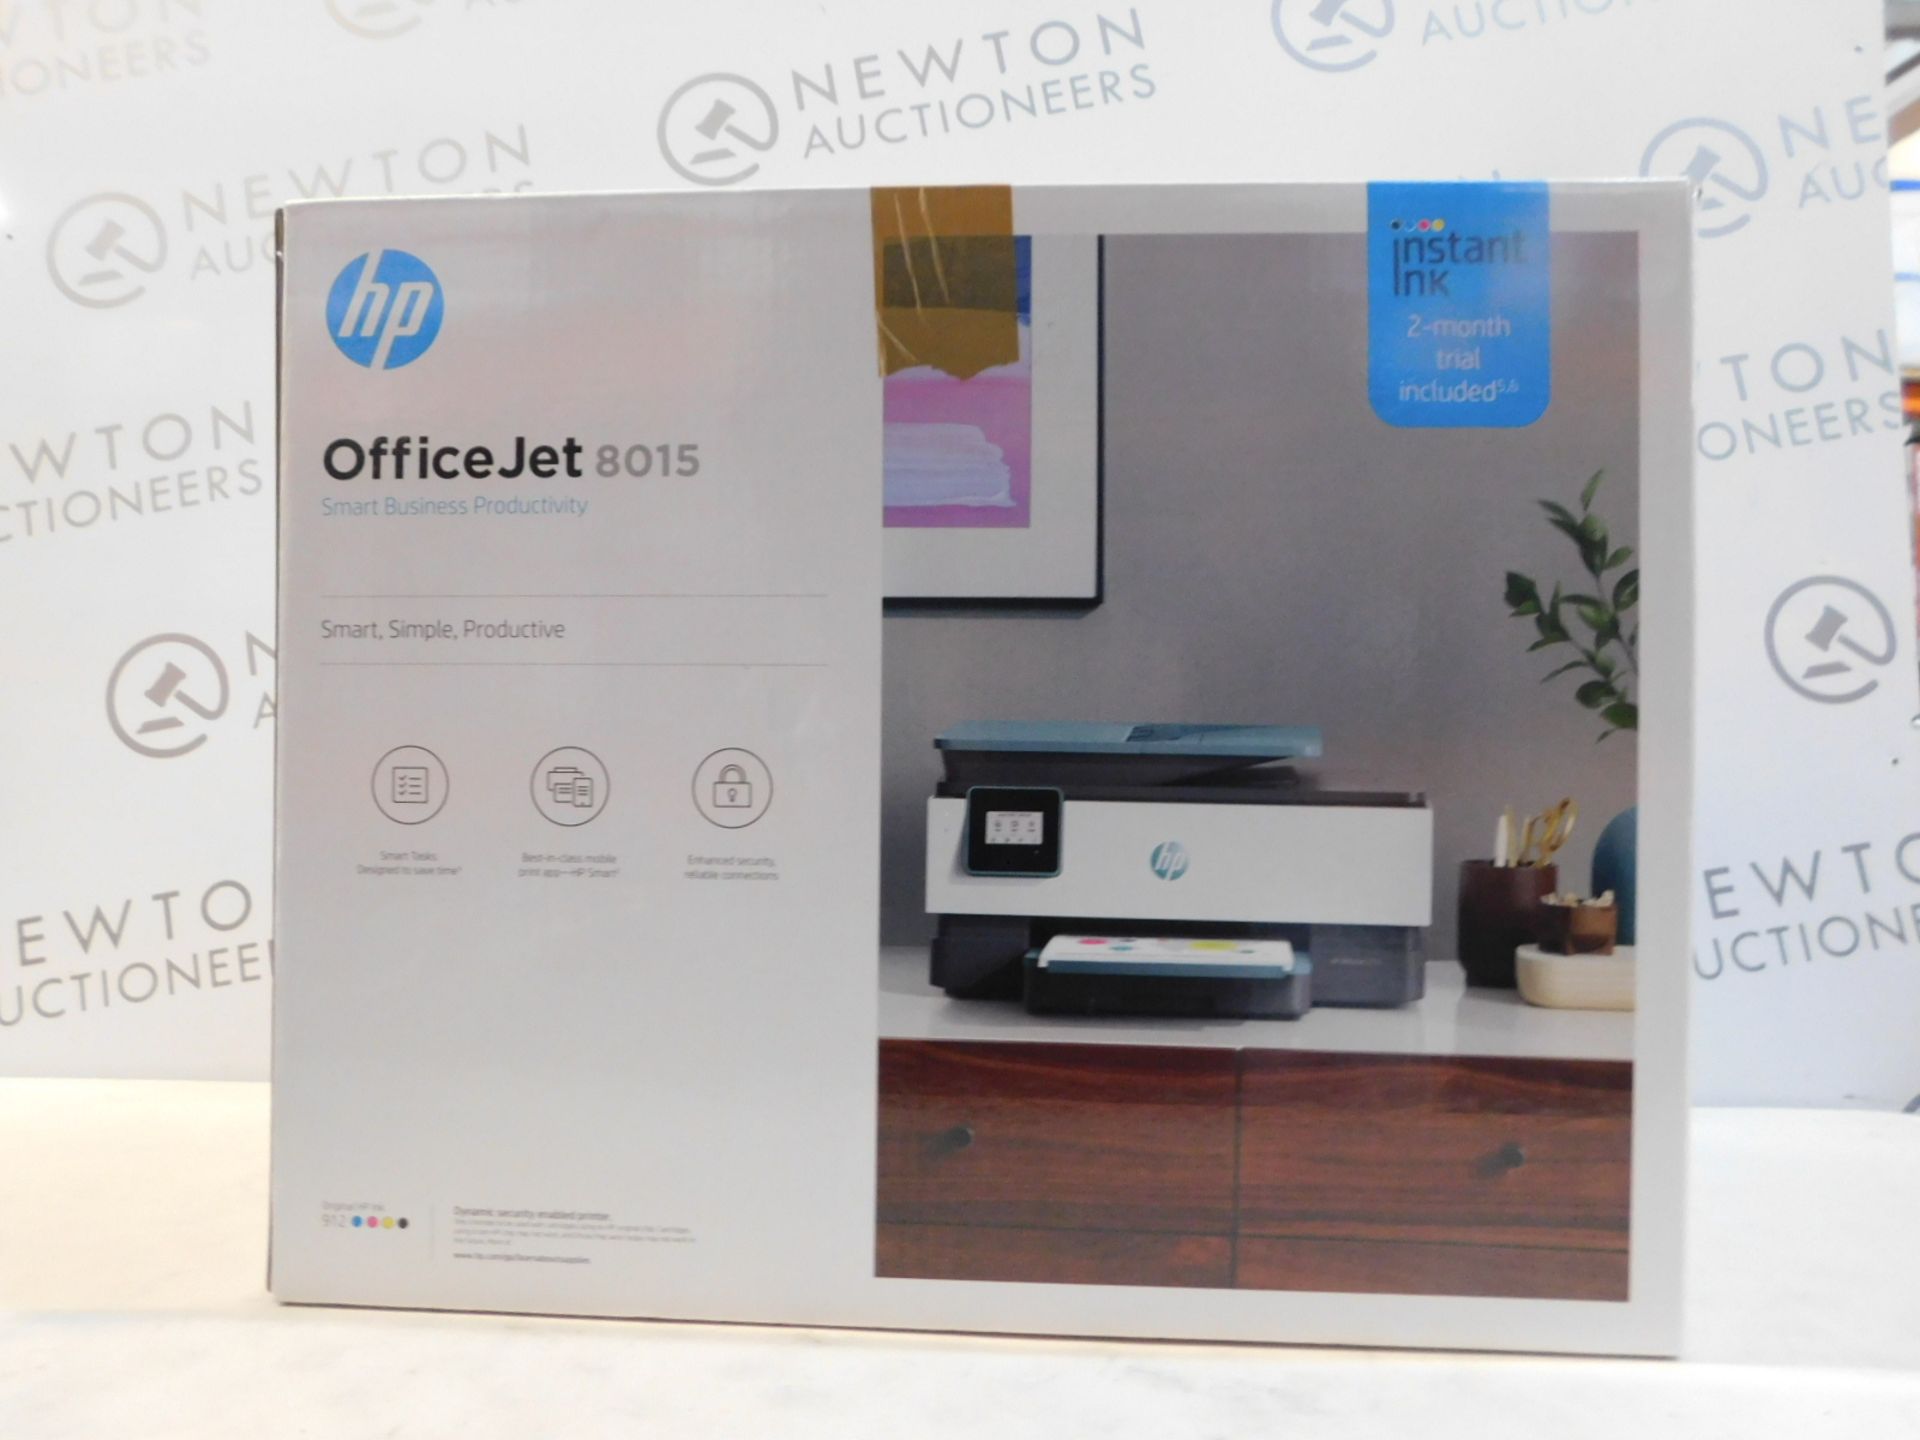 1 BOXED HP OFFICEJET 8015 ALL-IN-ONE WIRELESS PRINTER RRP Â£114.99